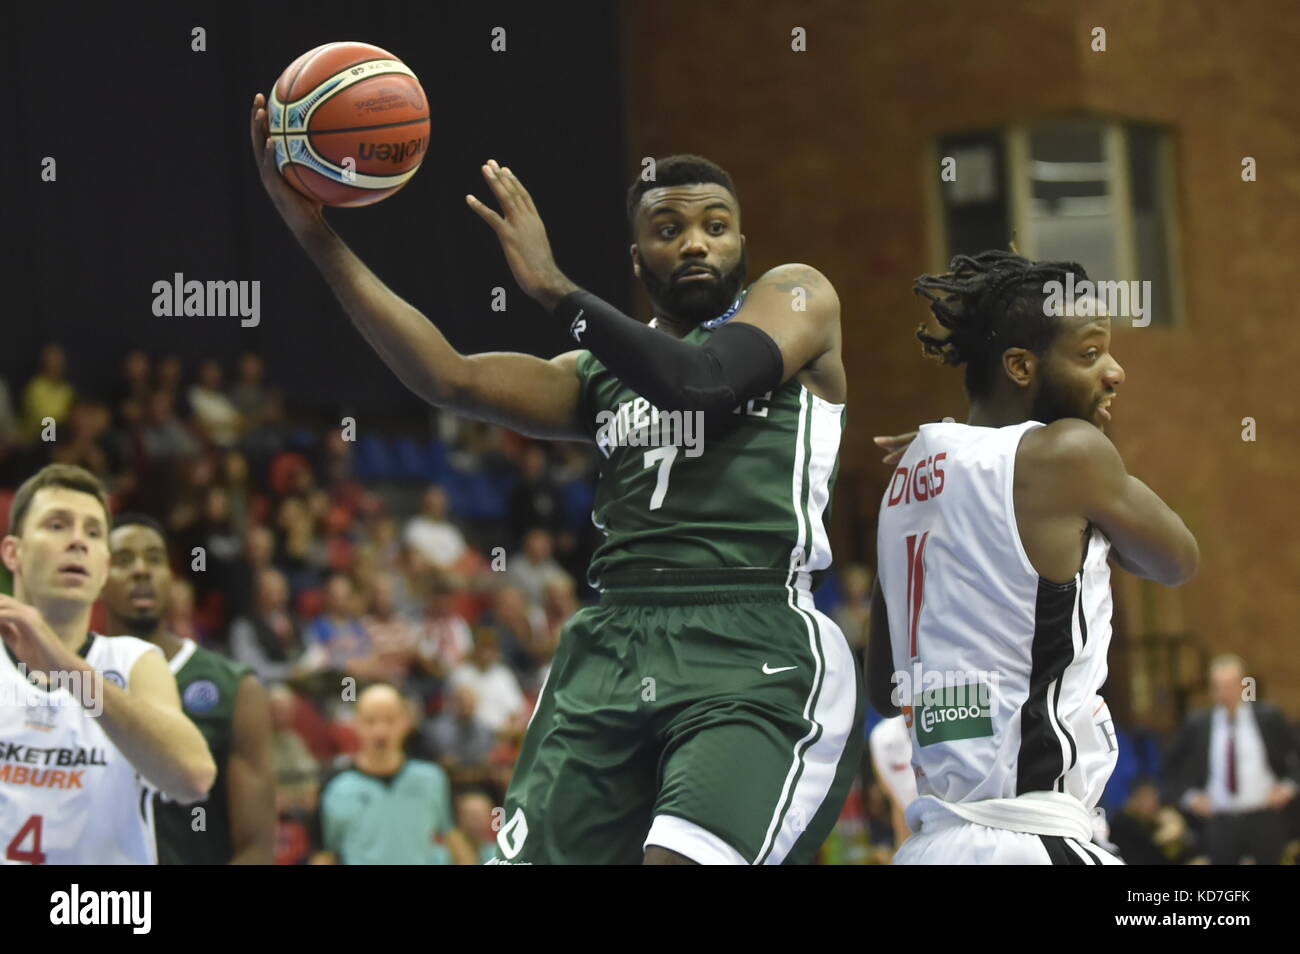 Nymburk, Czech Republic. 10th Oct, 2017. Jamal Shuler of Nanterre, center, Quincy Diggs of Nymburk, right, and Petr Benda of Nymburk, left, in action during the Champions Basketball League group D first round match Nymburk vs Nanterre in Nymburk, Czech Republic, October 10, 2017. Credit: Josef Vostarek/CTK Photo/Alamy Live News Stock Photo